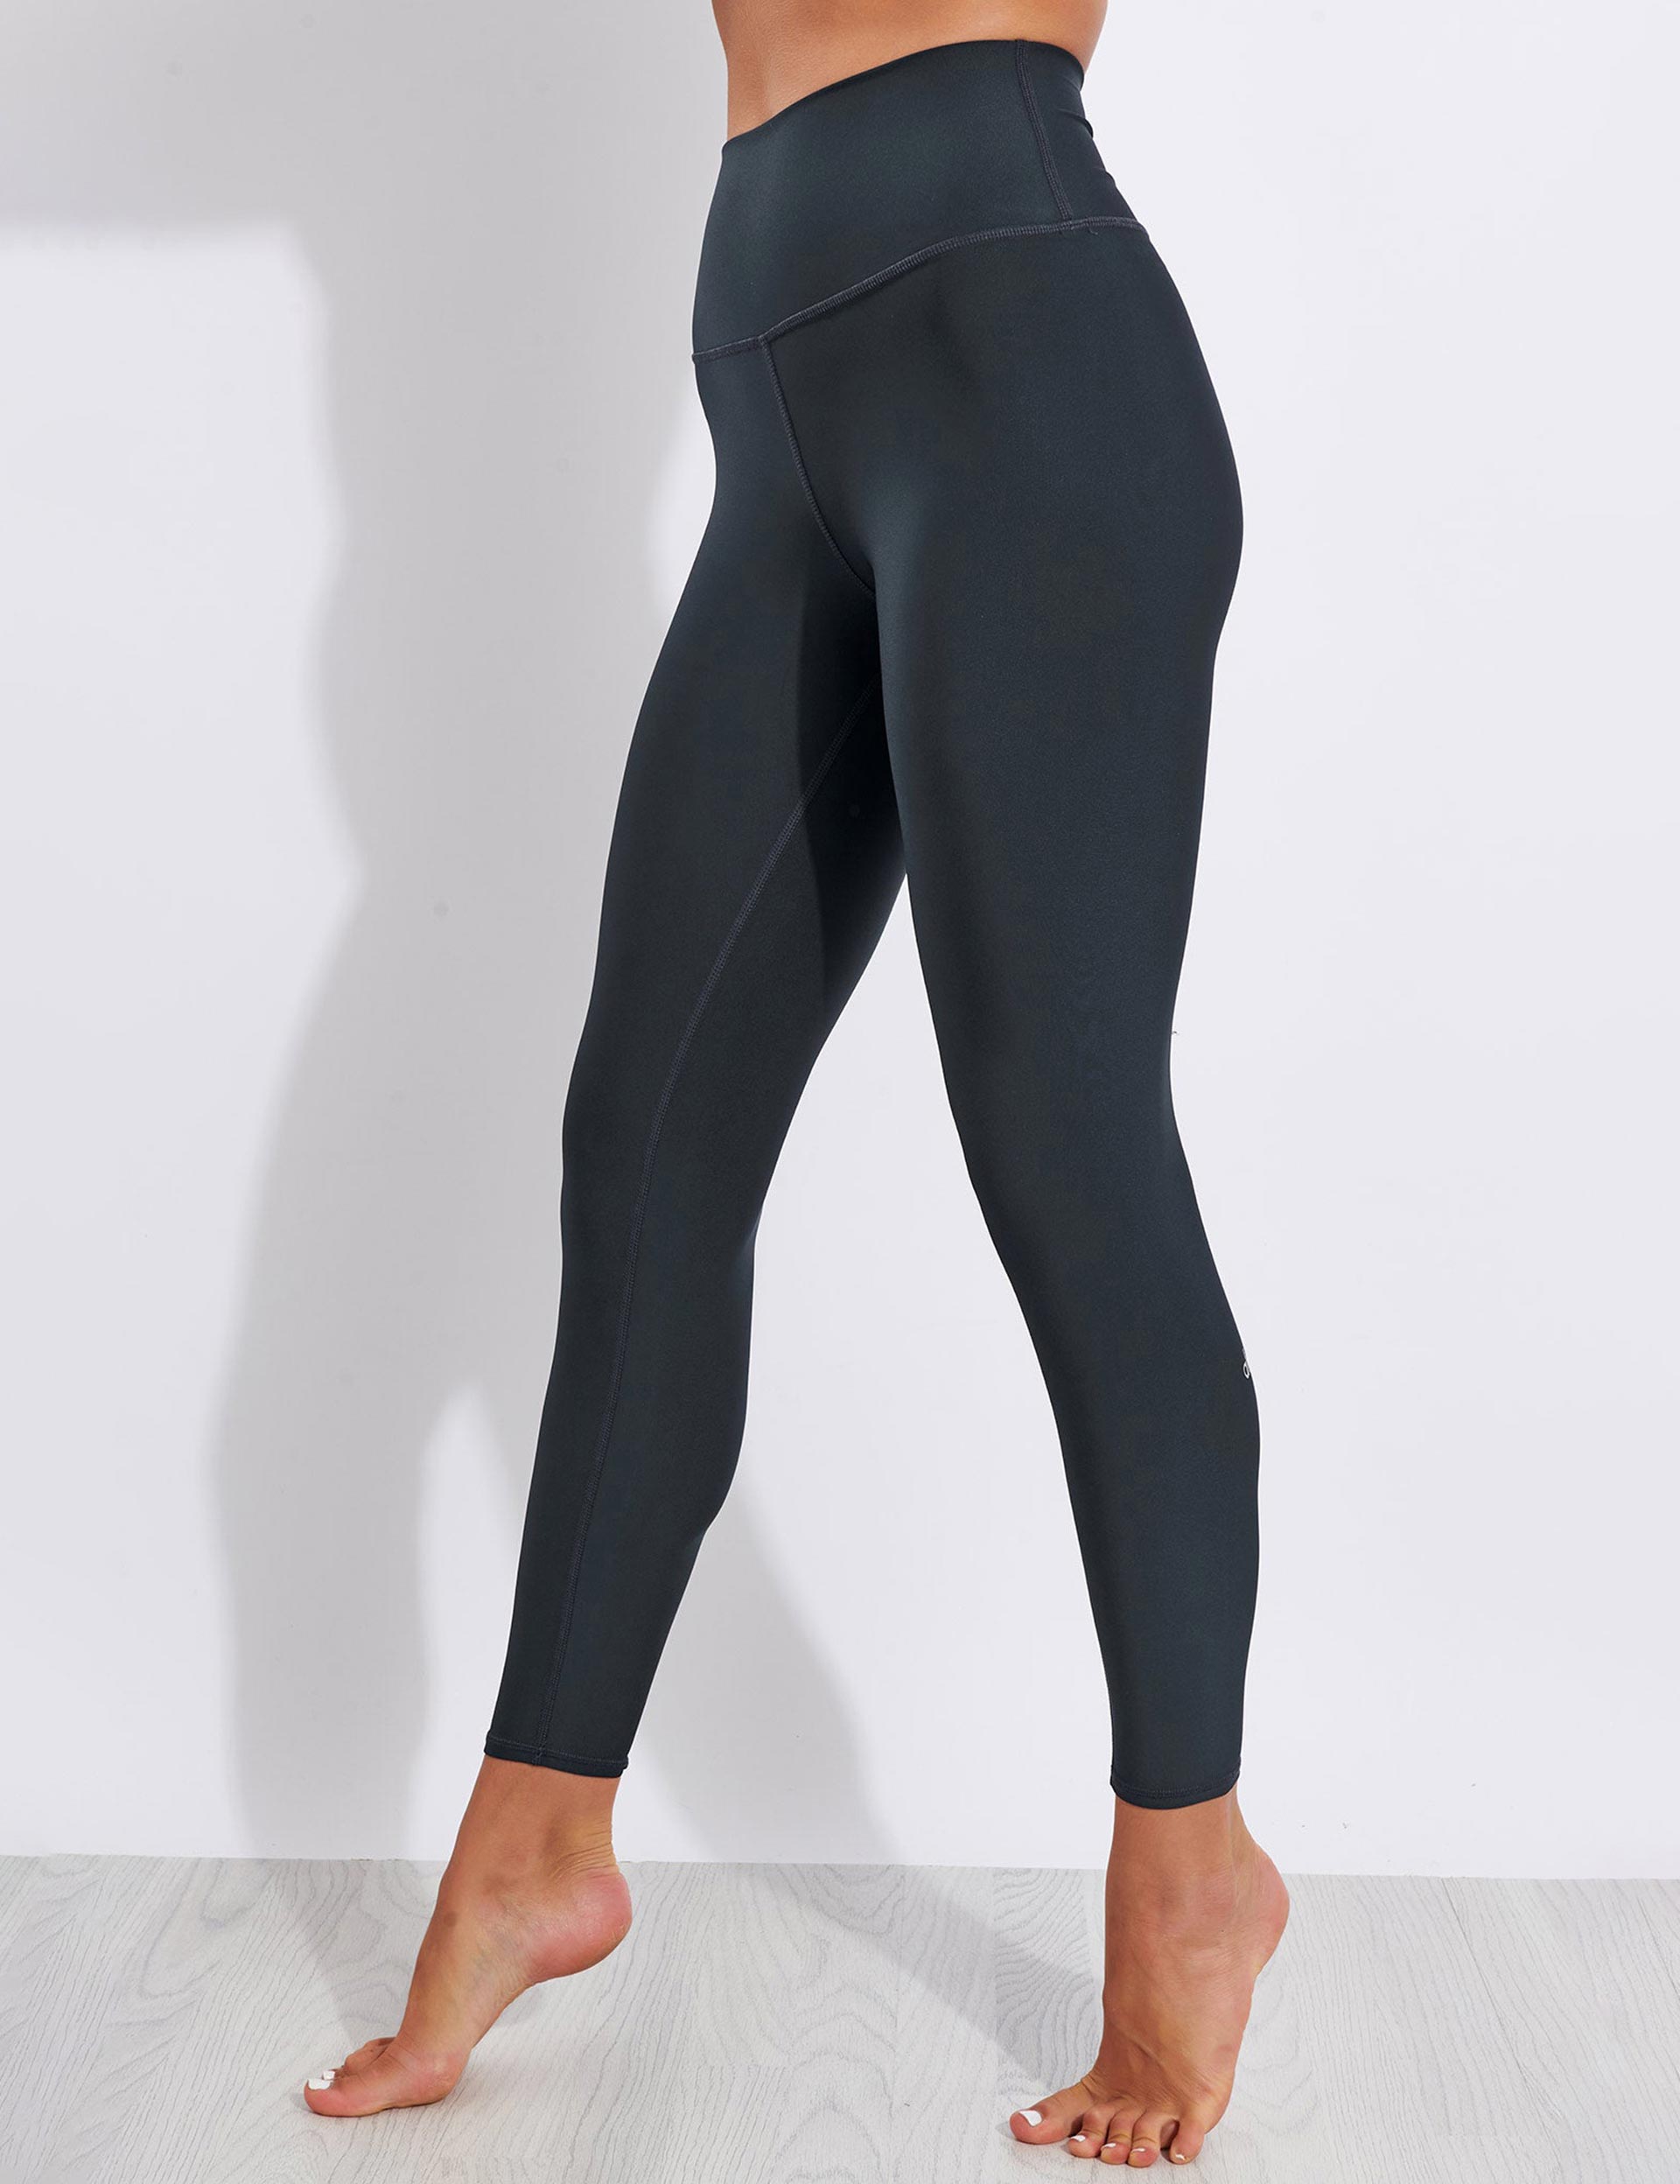 Alo Yoga Airlift Suit Up Sports Bra & Airlift High Waist Suit Up